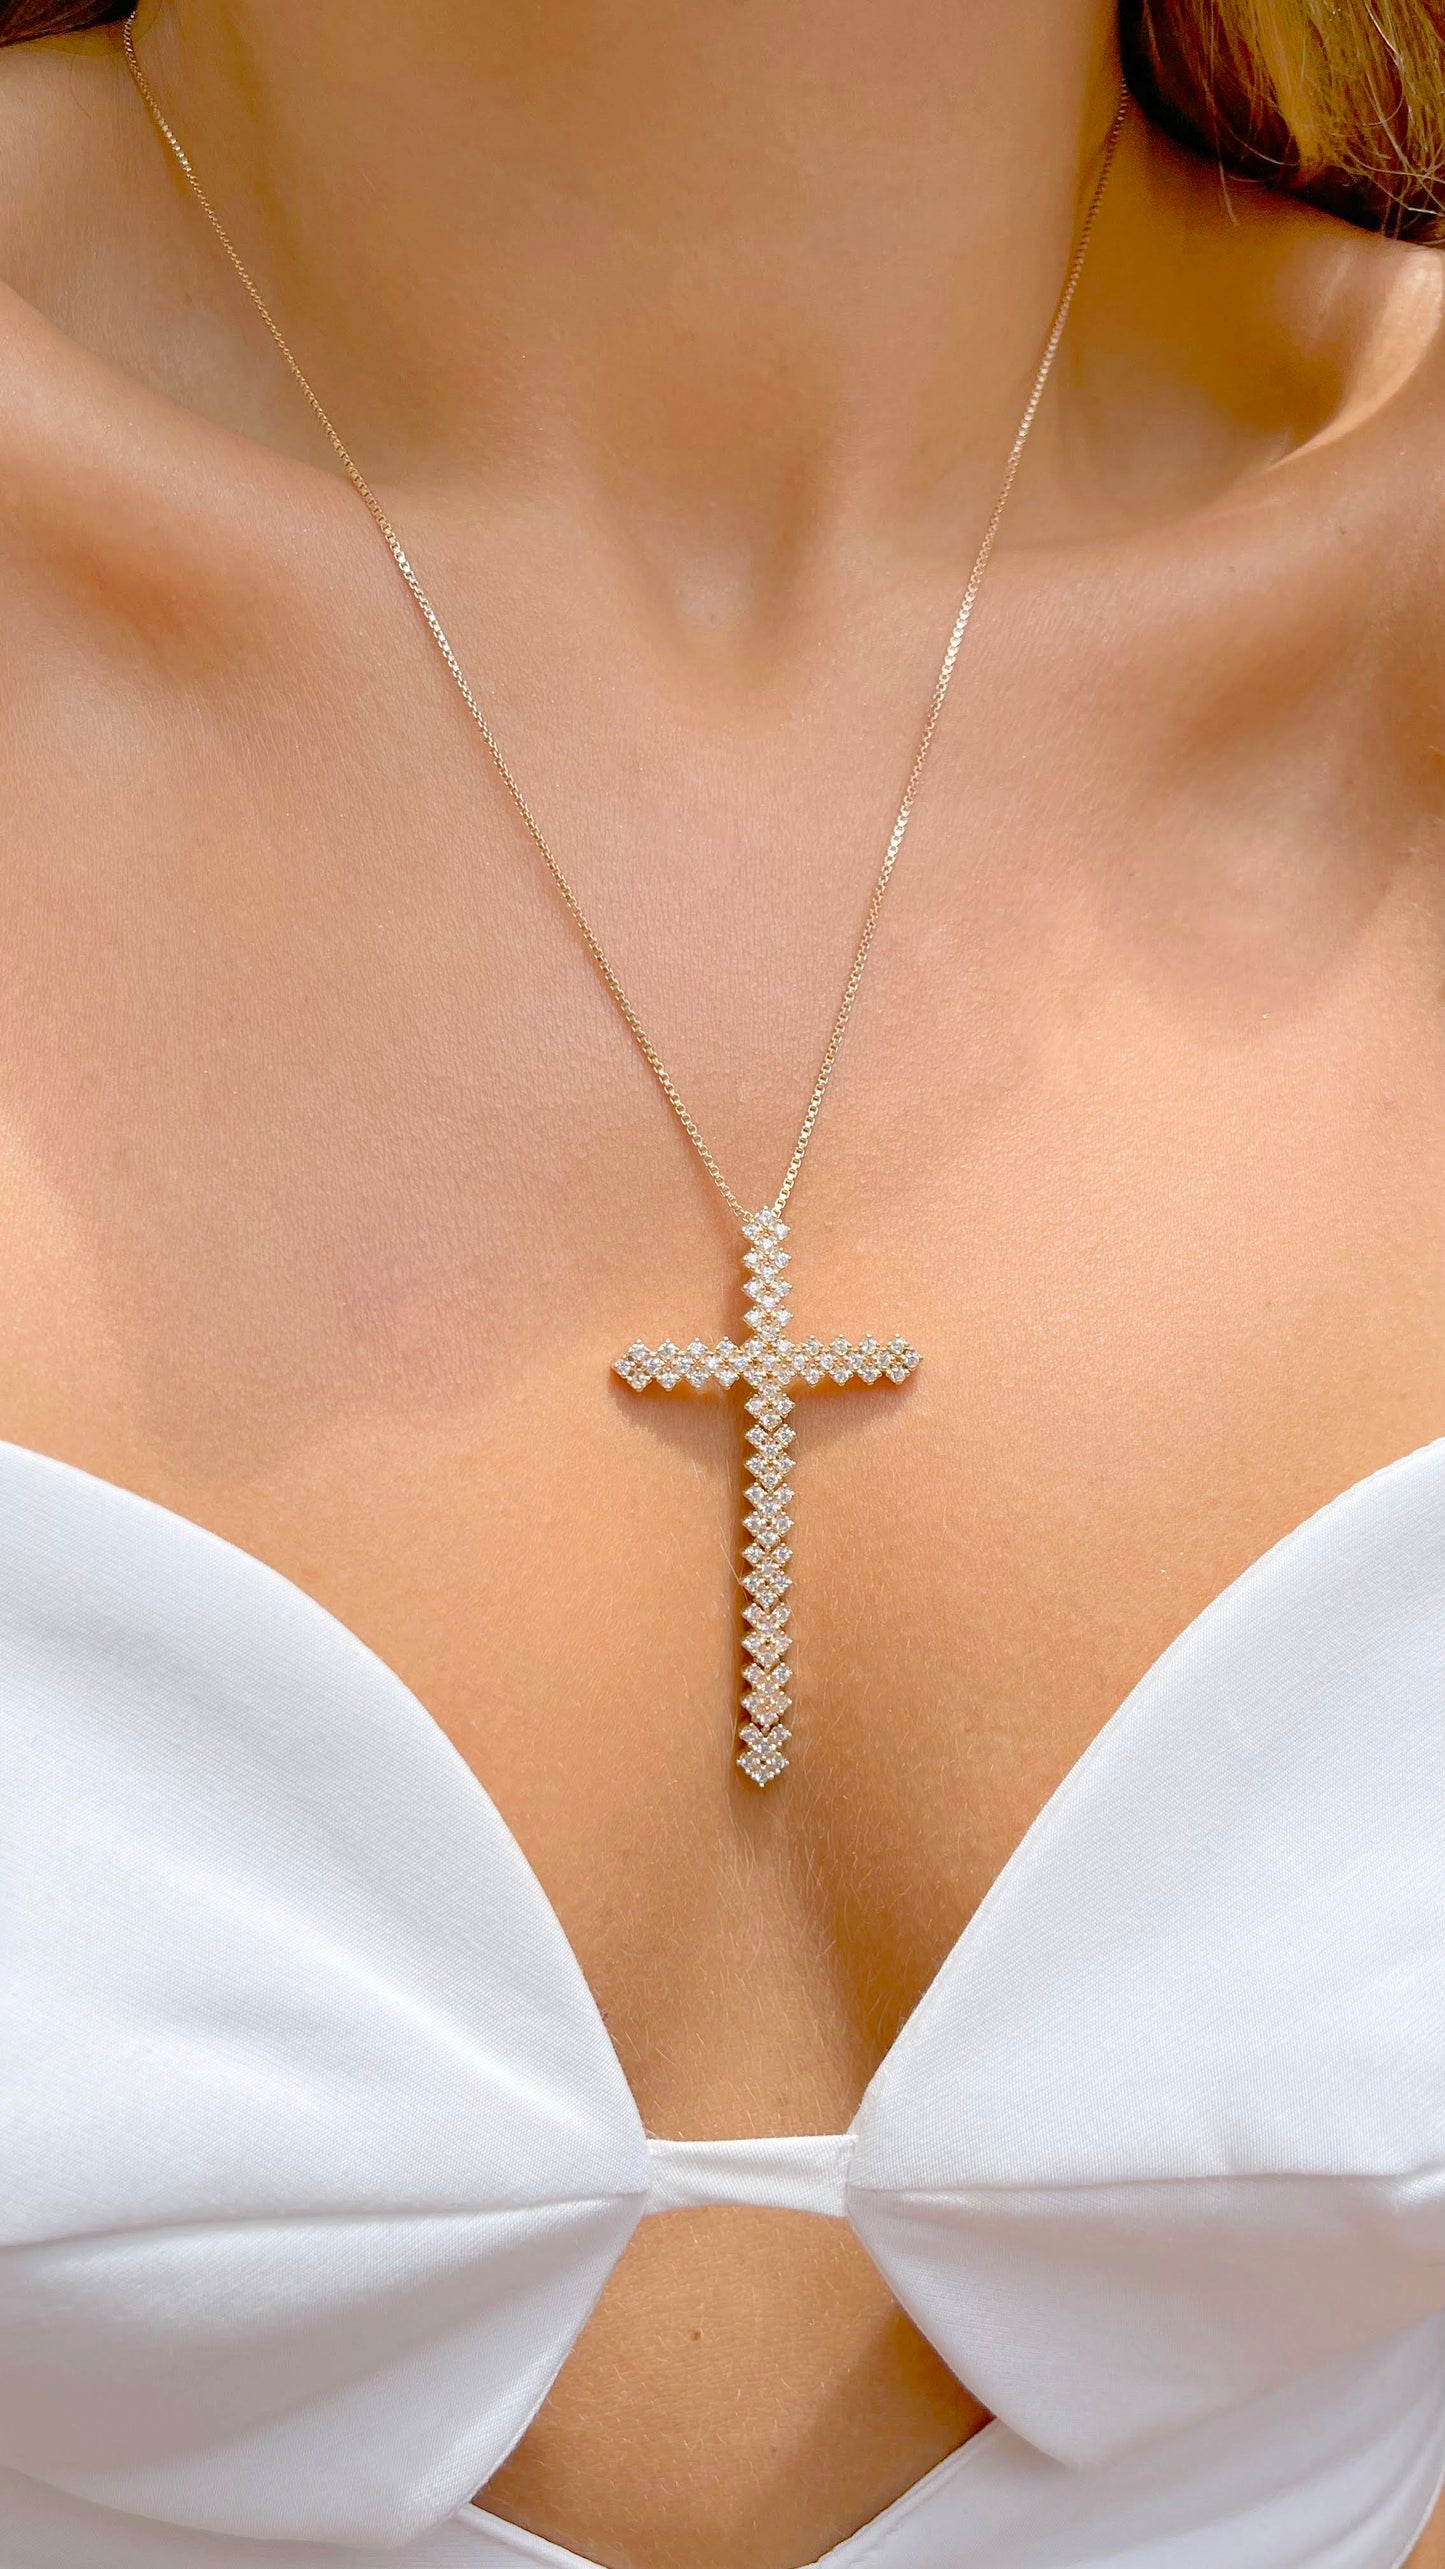 18k gold plated cross necklace with white CZ